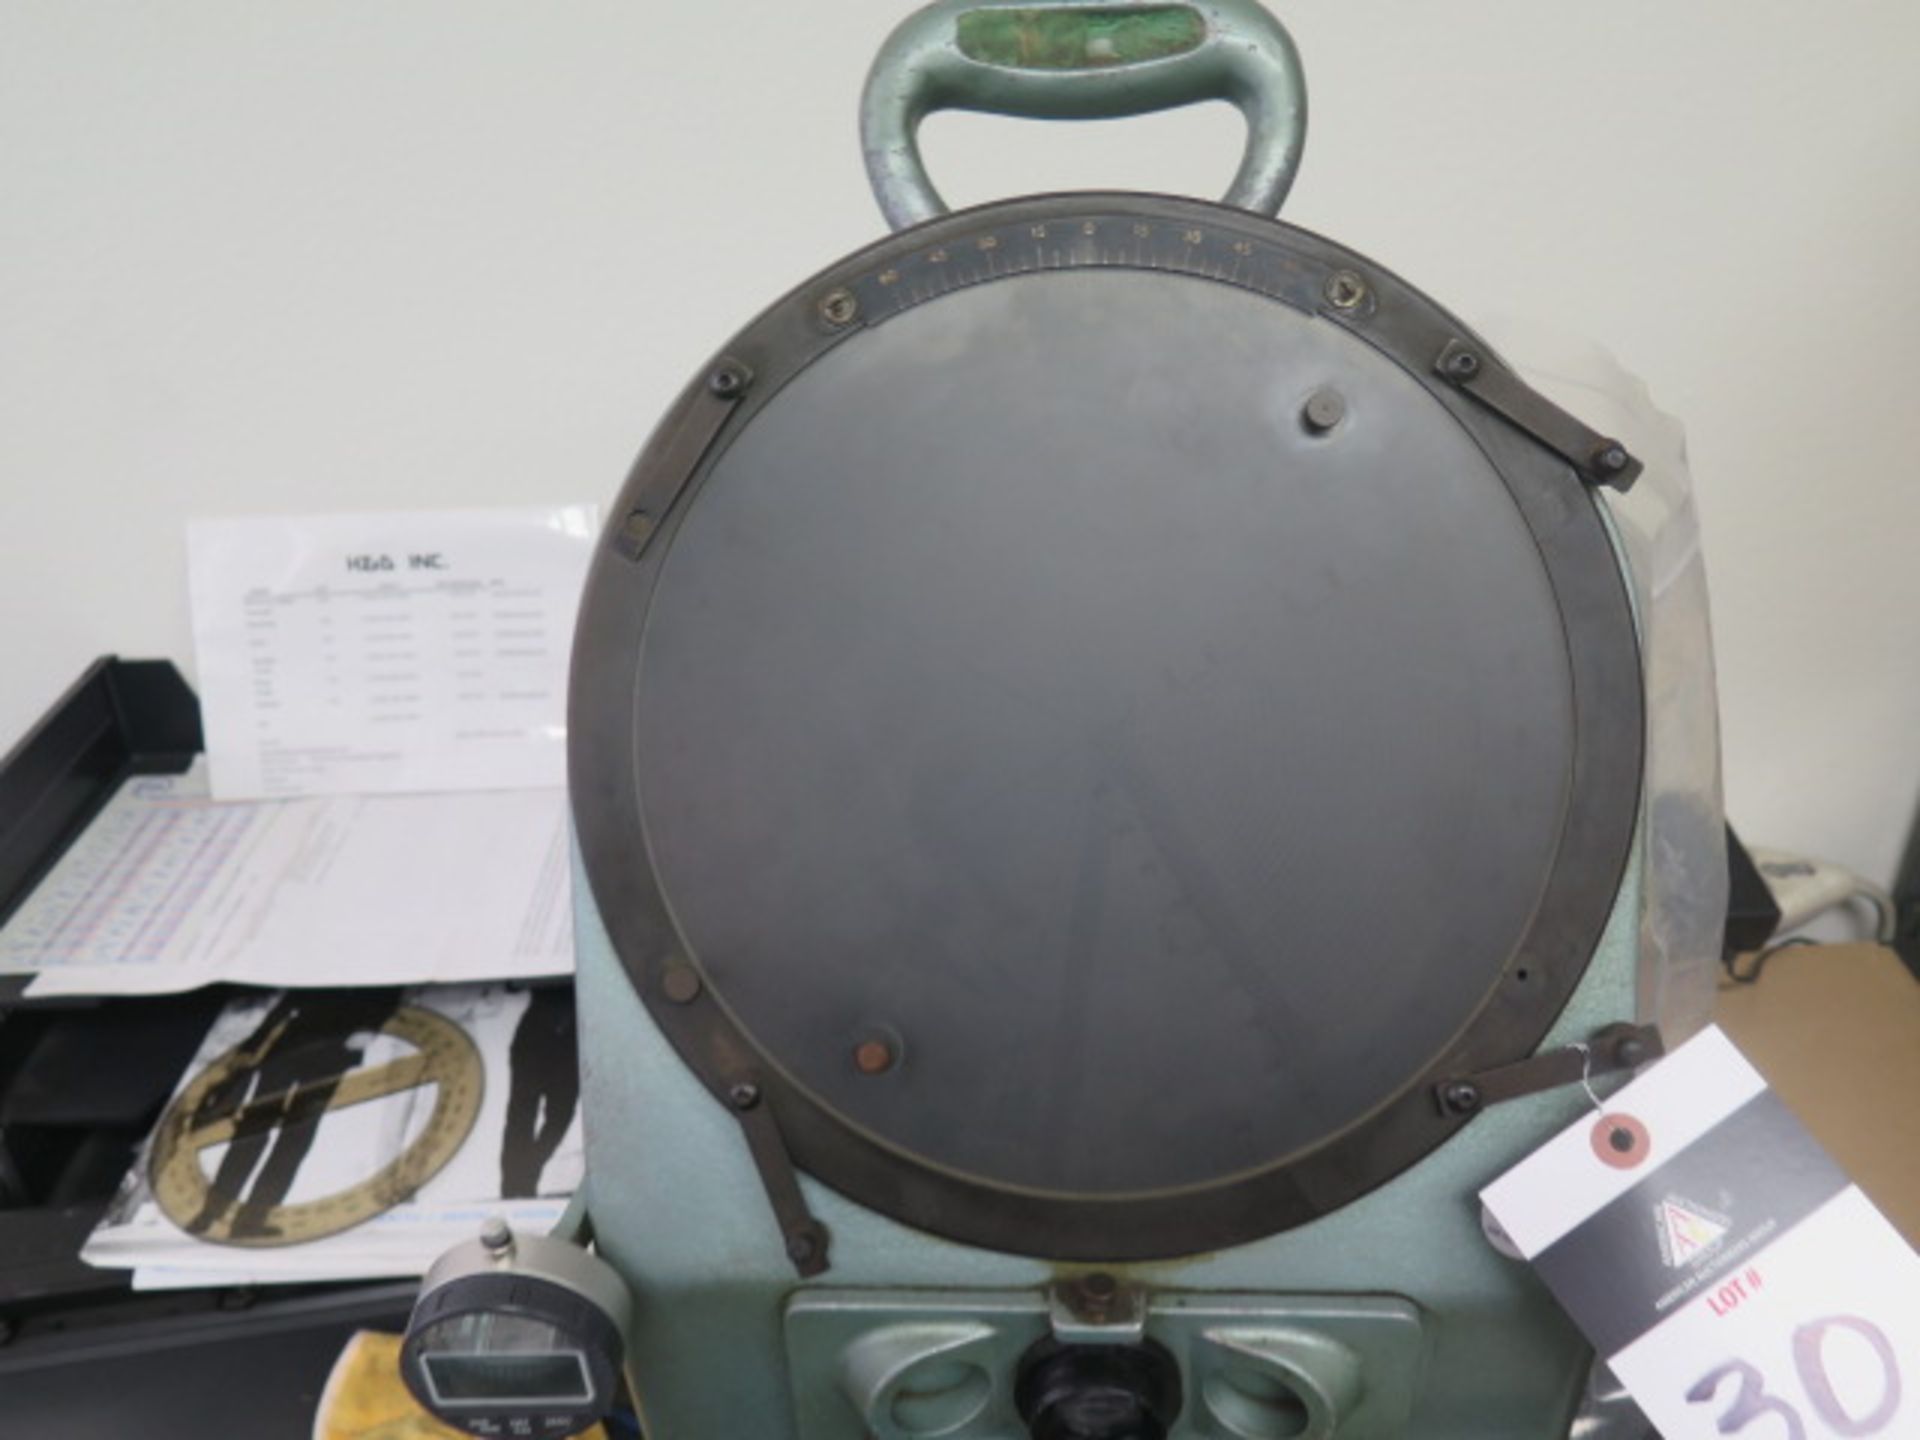 Rankin Brothers 10" Bench Model Optical Comparator w/ Digital Indicator Readouts - Image 3 of 5